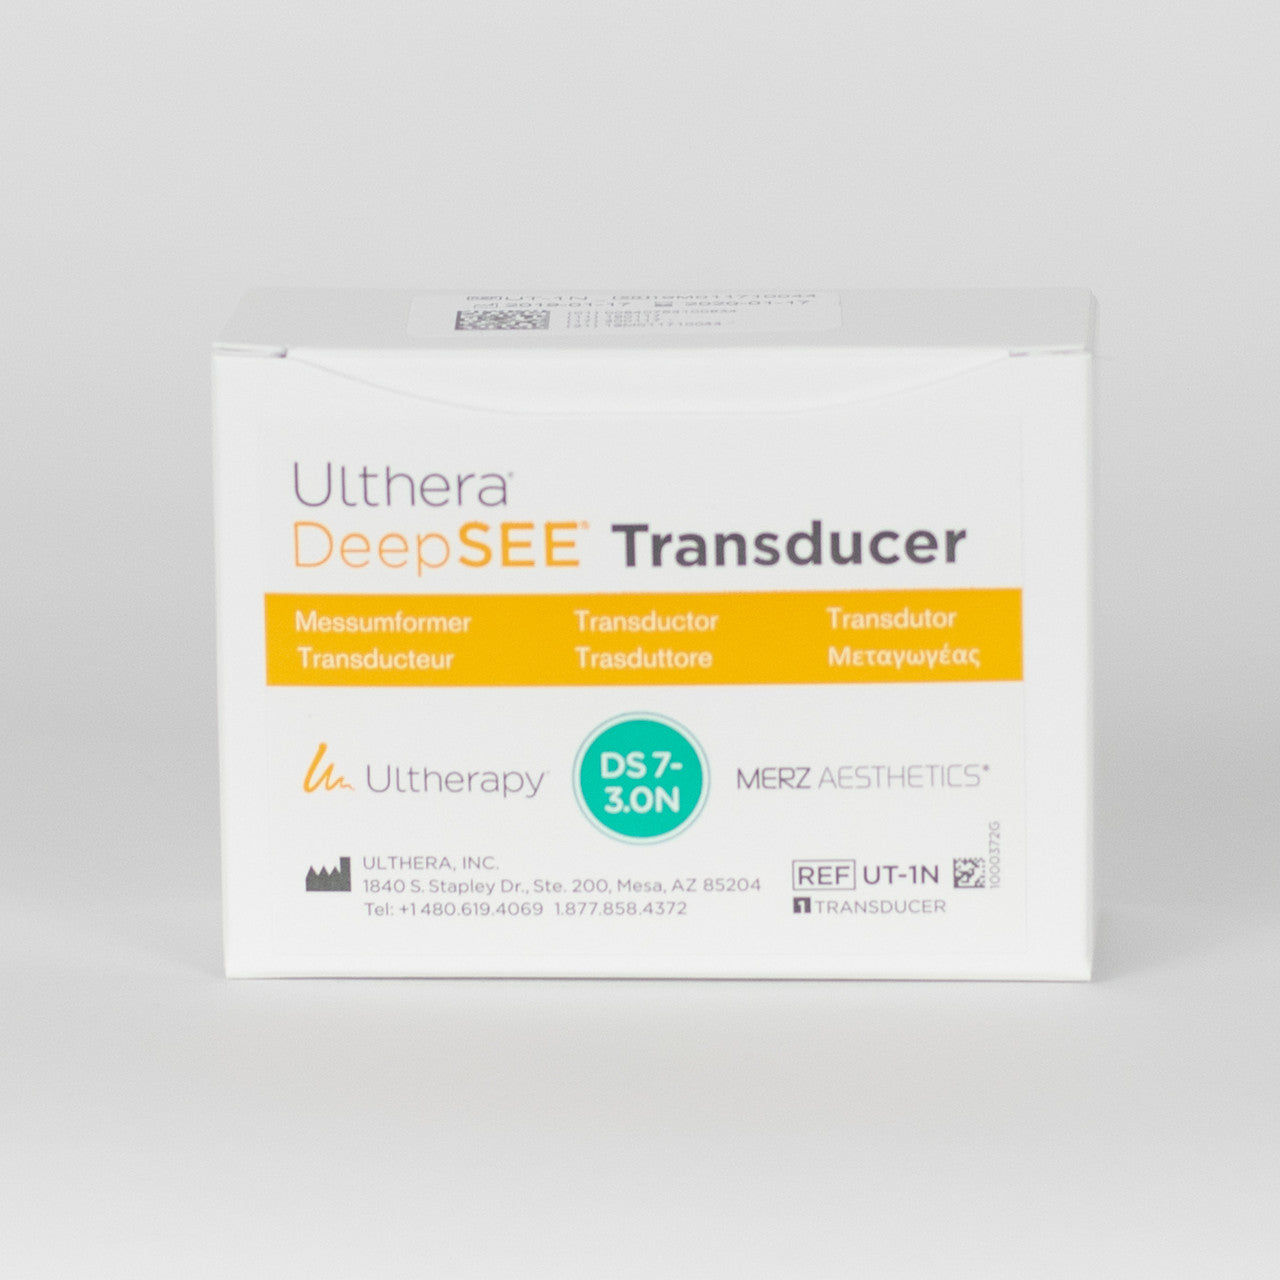 Ultherapy DeepSEE DS 7-3.0 N (Green) Transducer Label